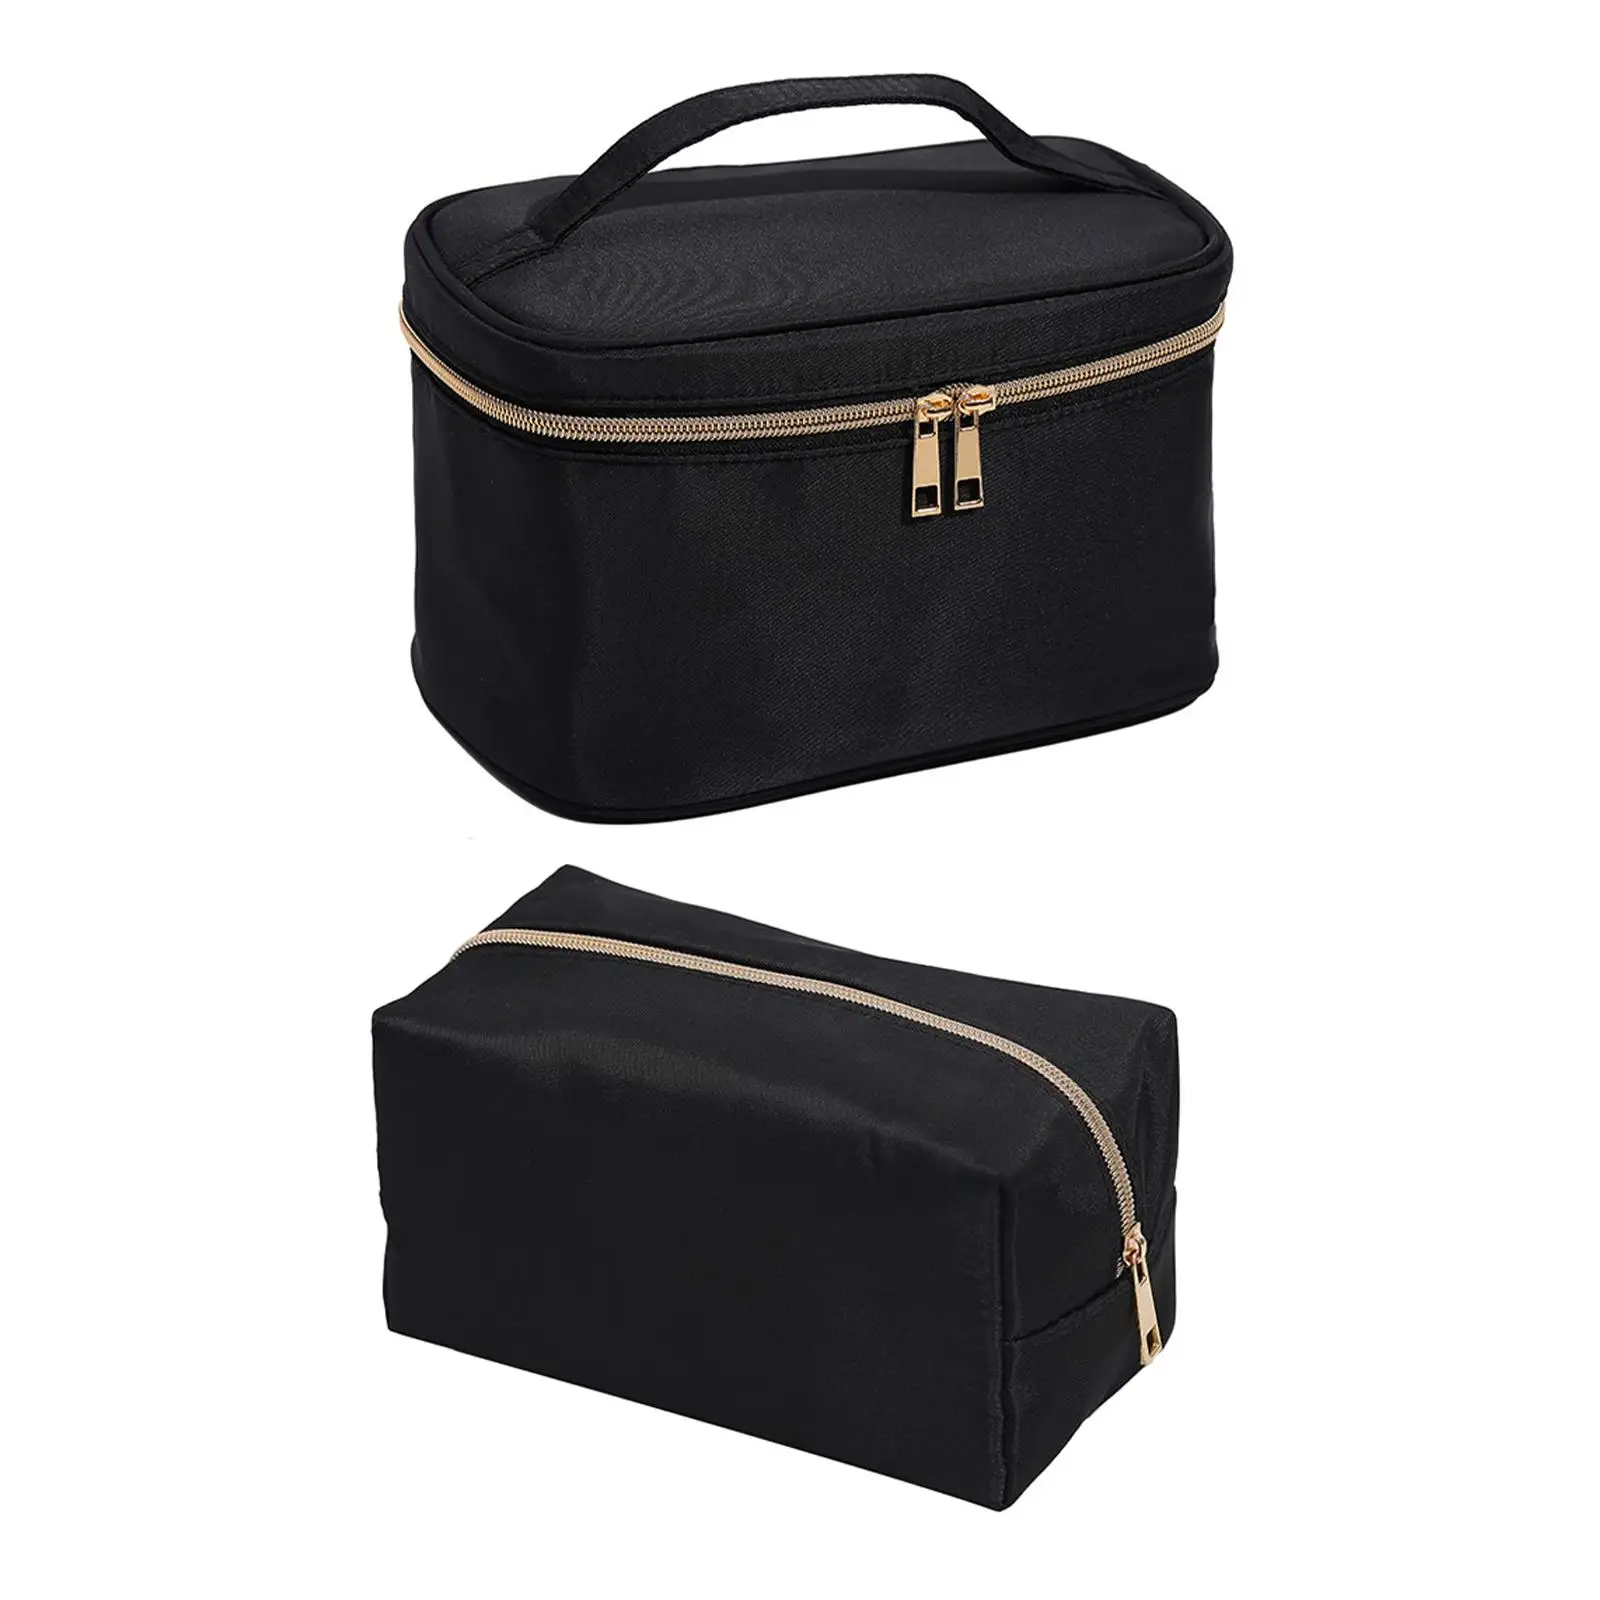 Travel Makeup Bag Lightweight Large Capacity Durable Cosmetic Pouch for Traveling Business Trip Hair Accessories Gym Toiletries